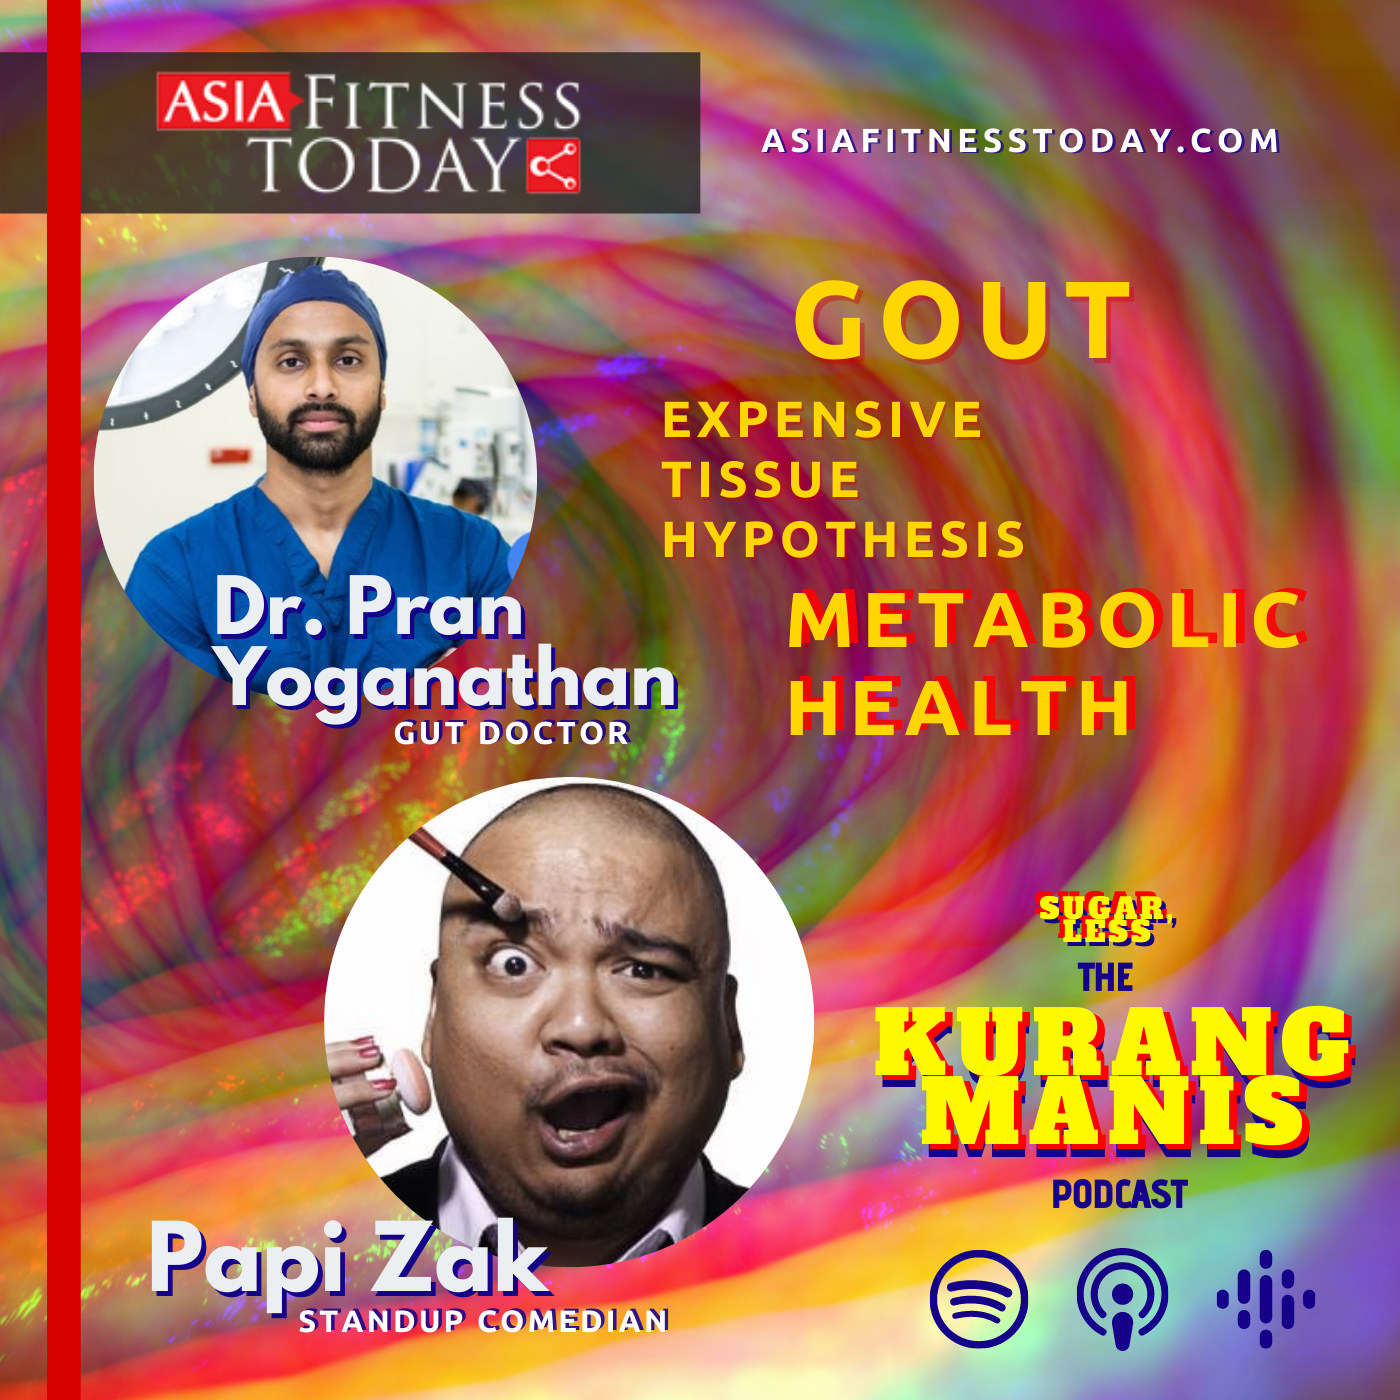 Asia Fitness Today The Kurang Manis (Sugar, Less) Podcast with Dr. Pran Yoganathan